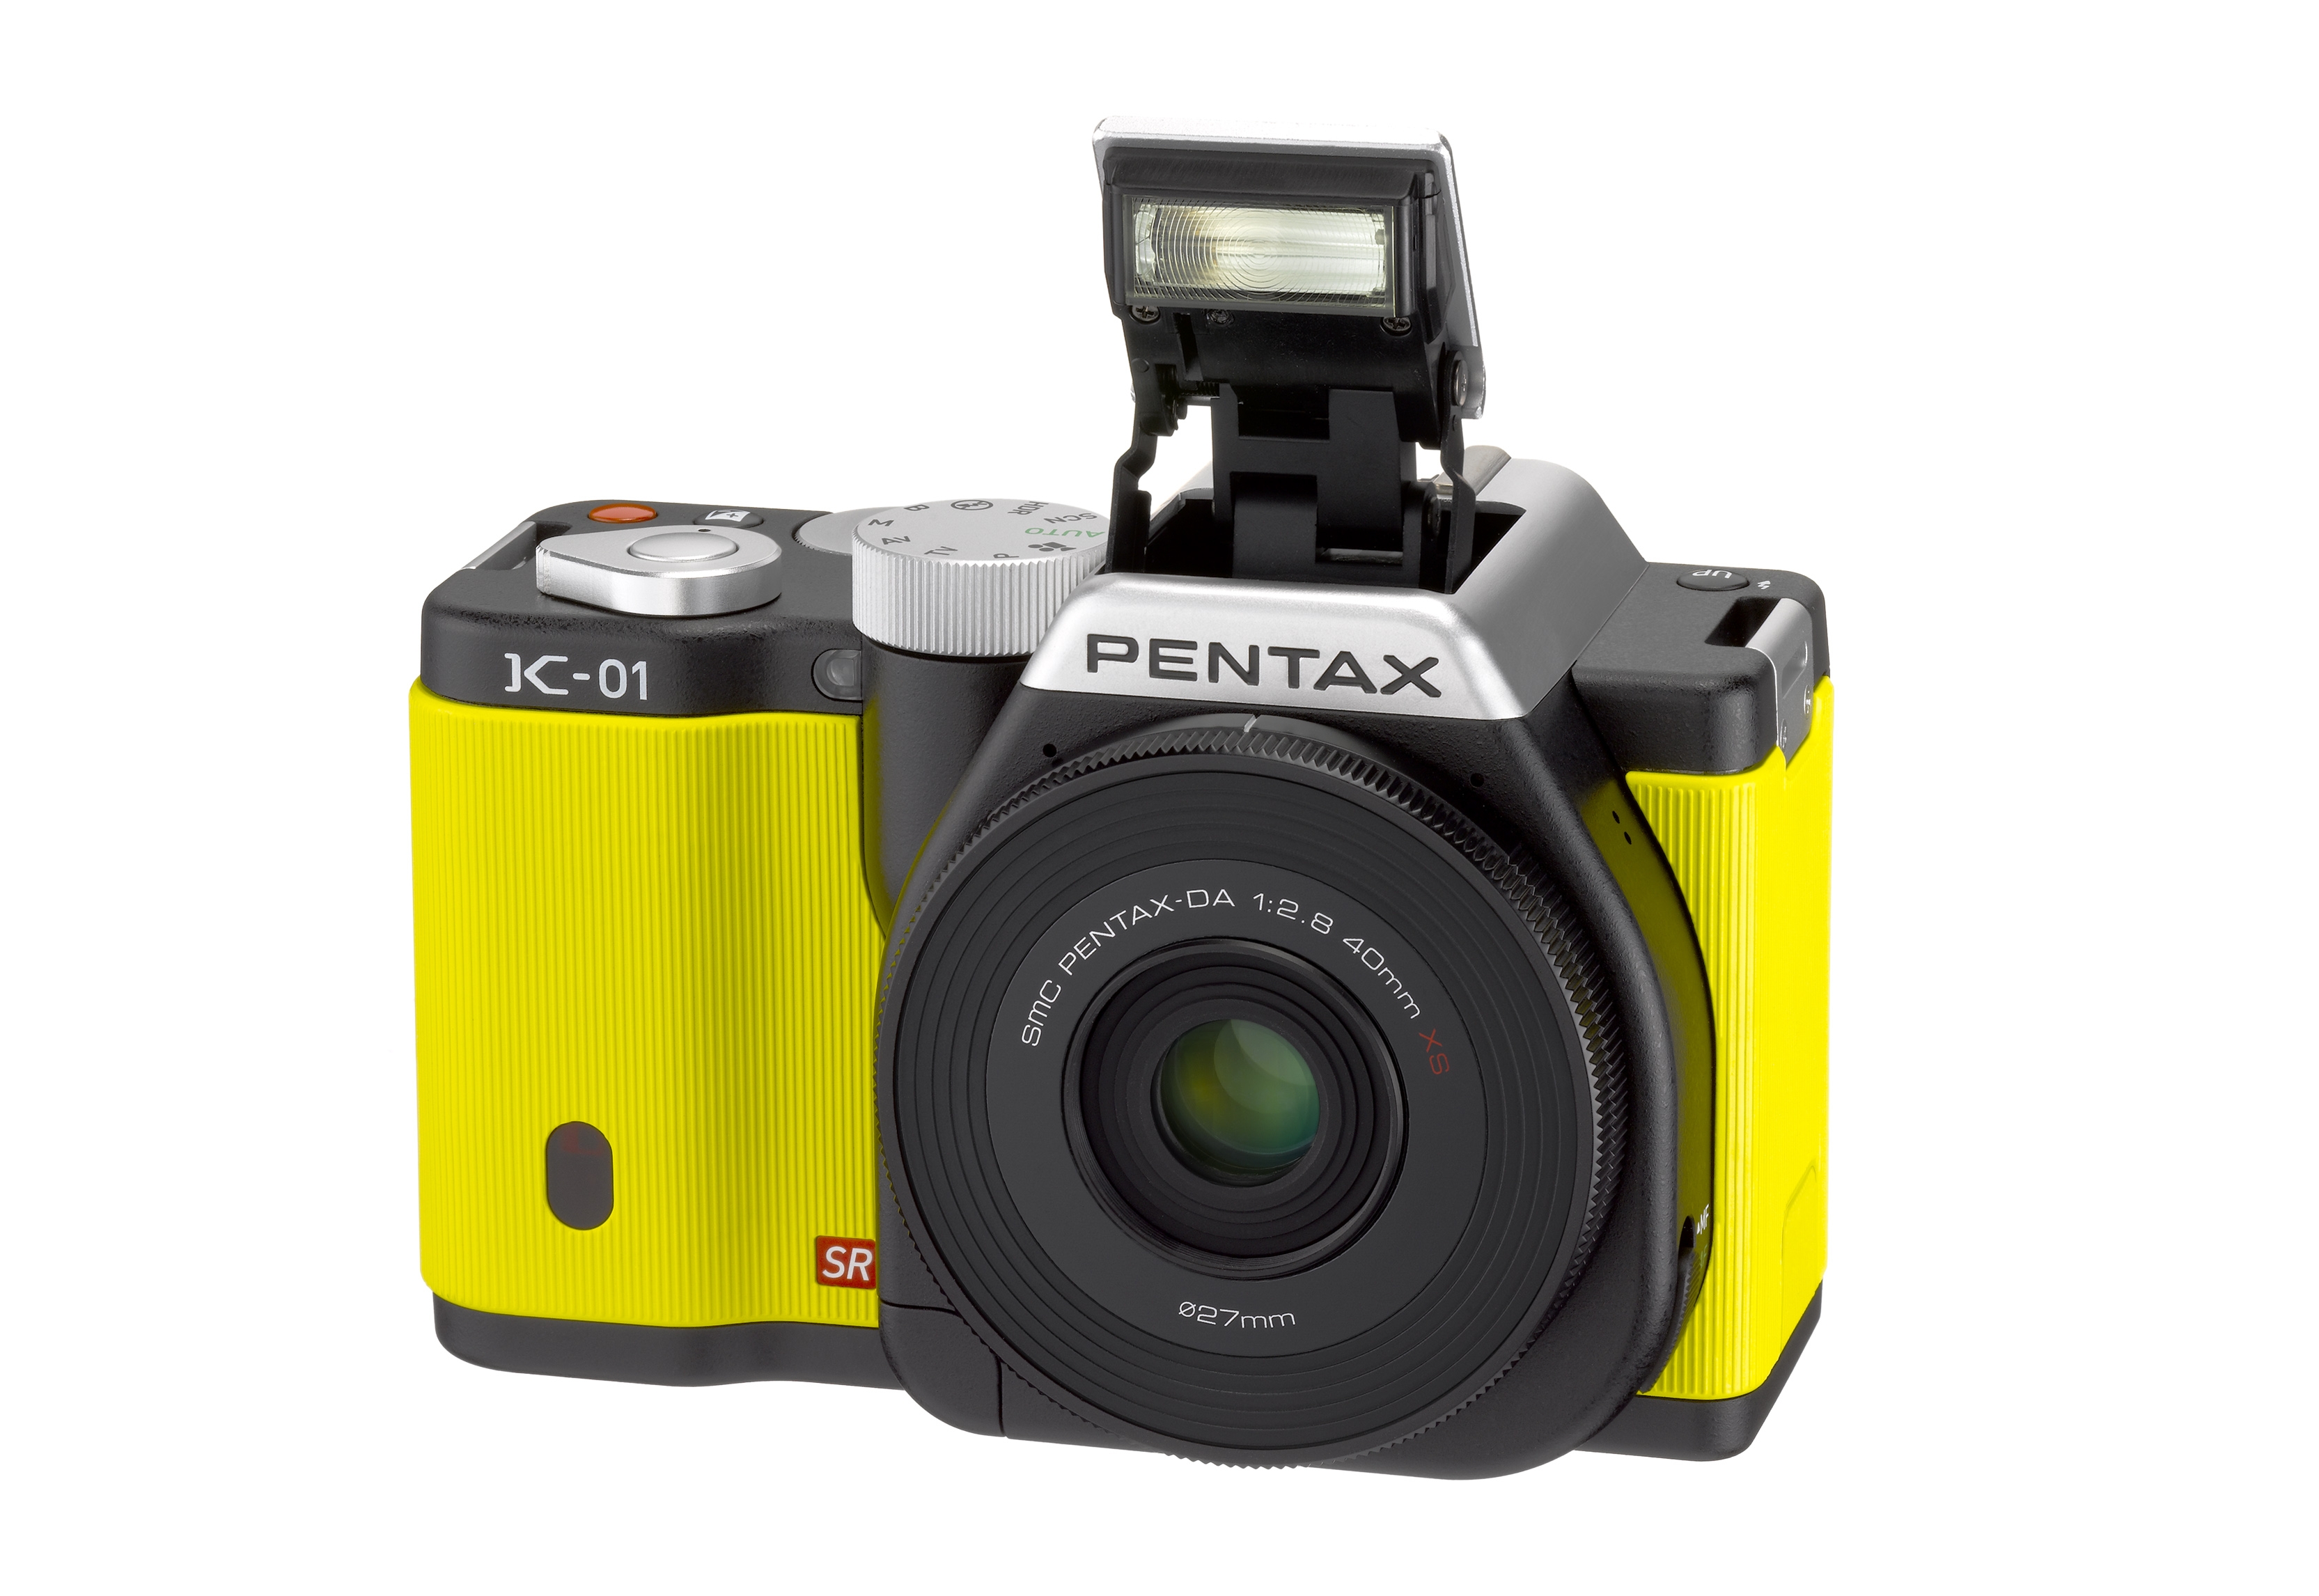 Pentax K-01 Announced - My Thoughts - Admiring Light